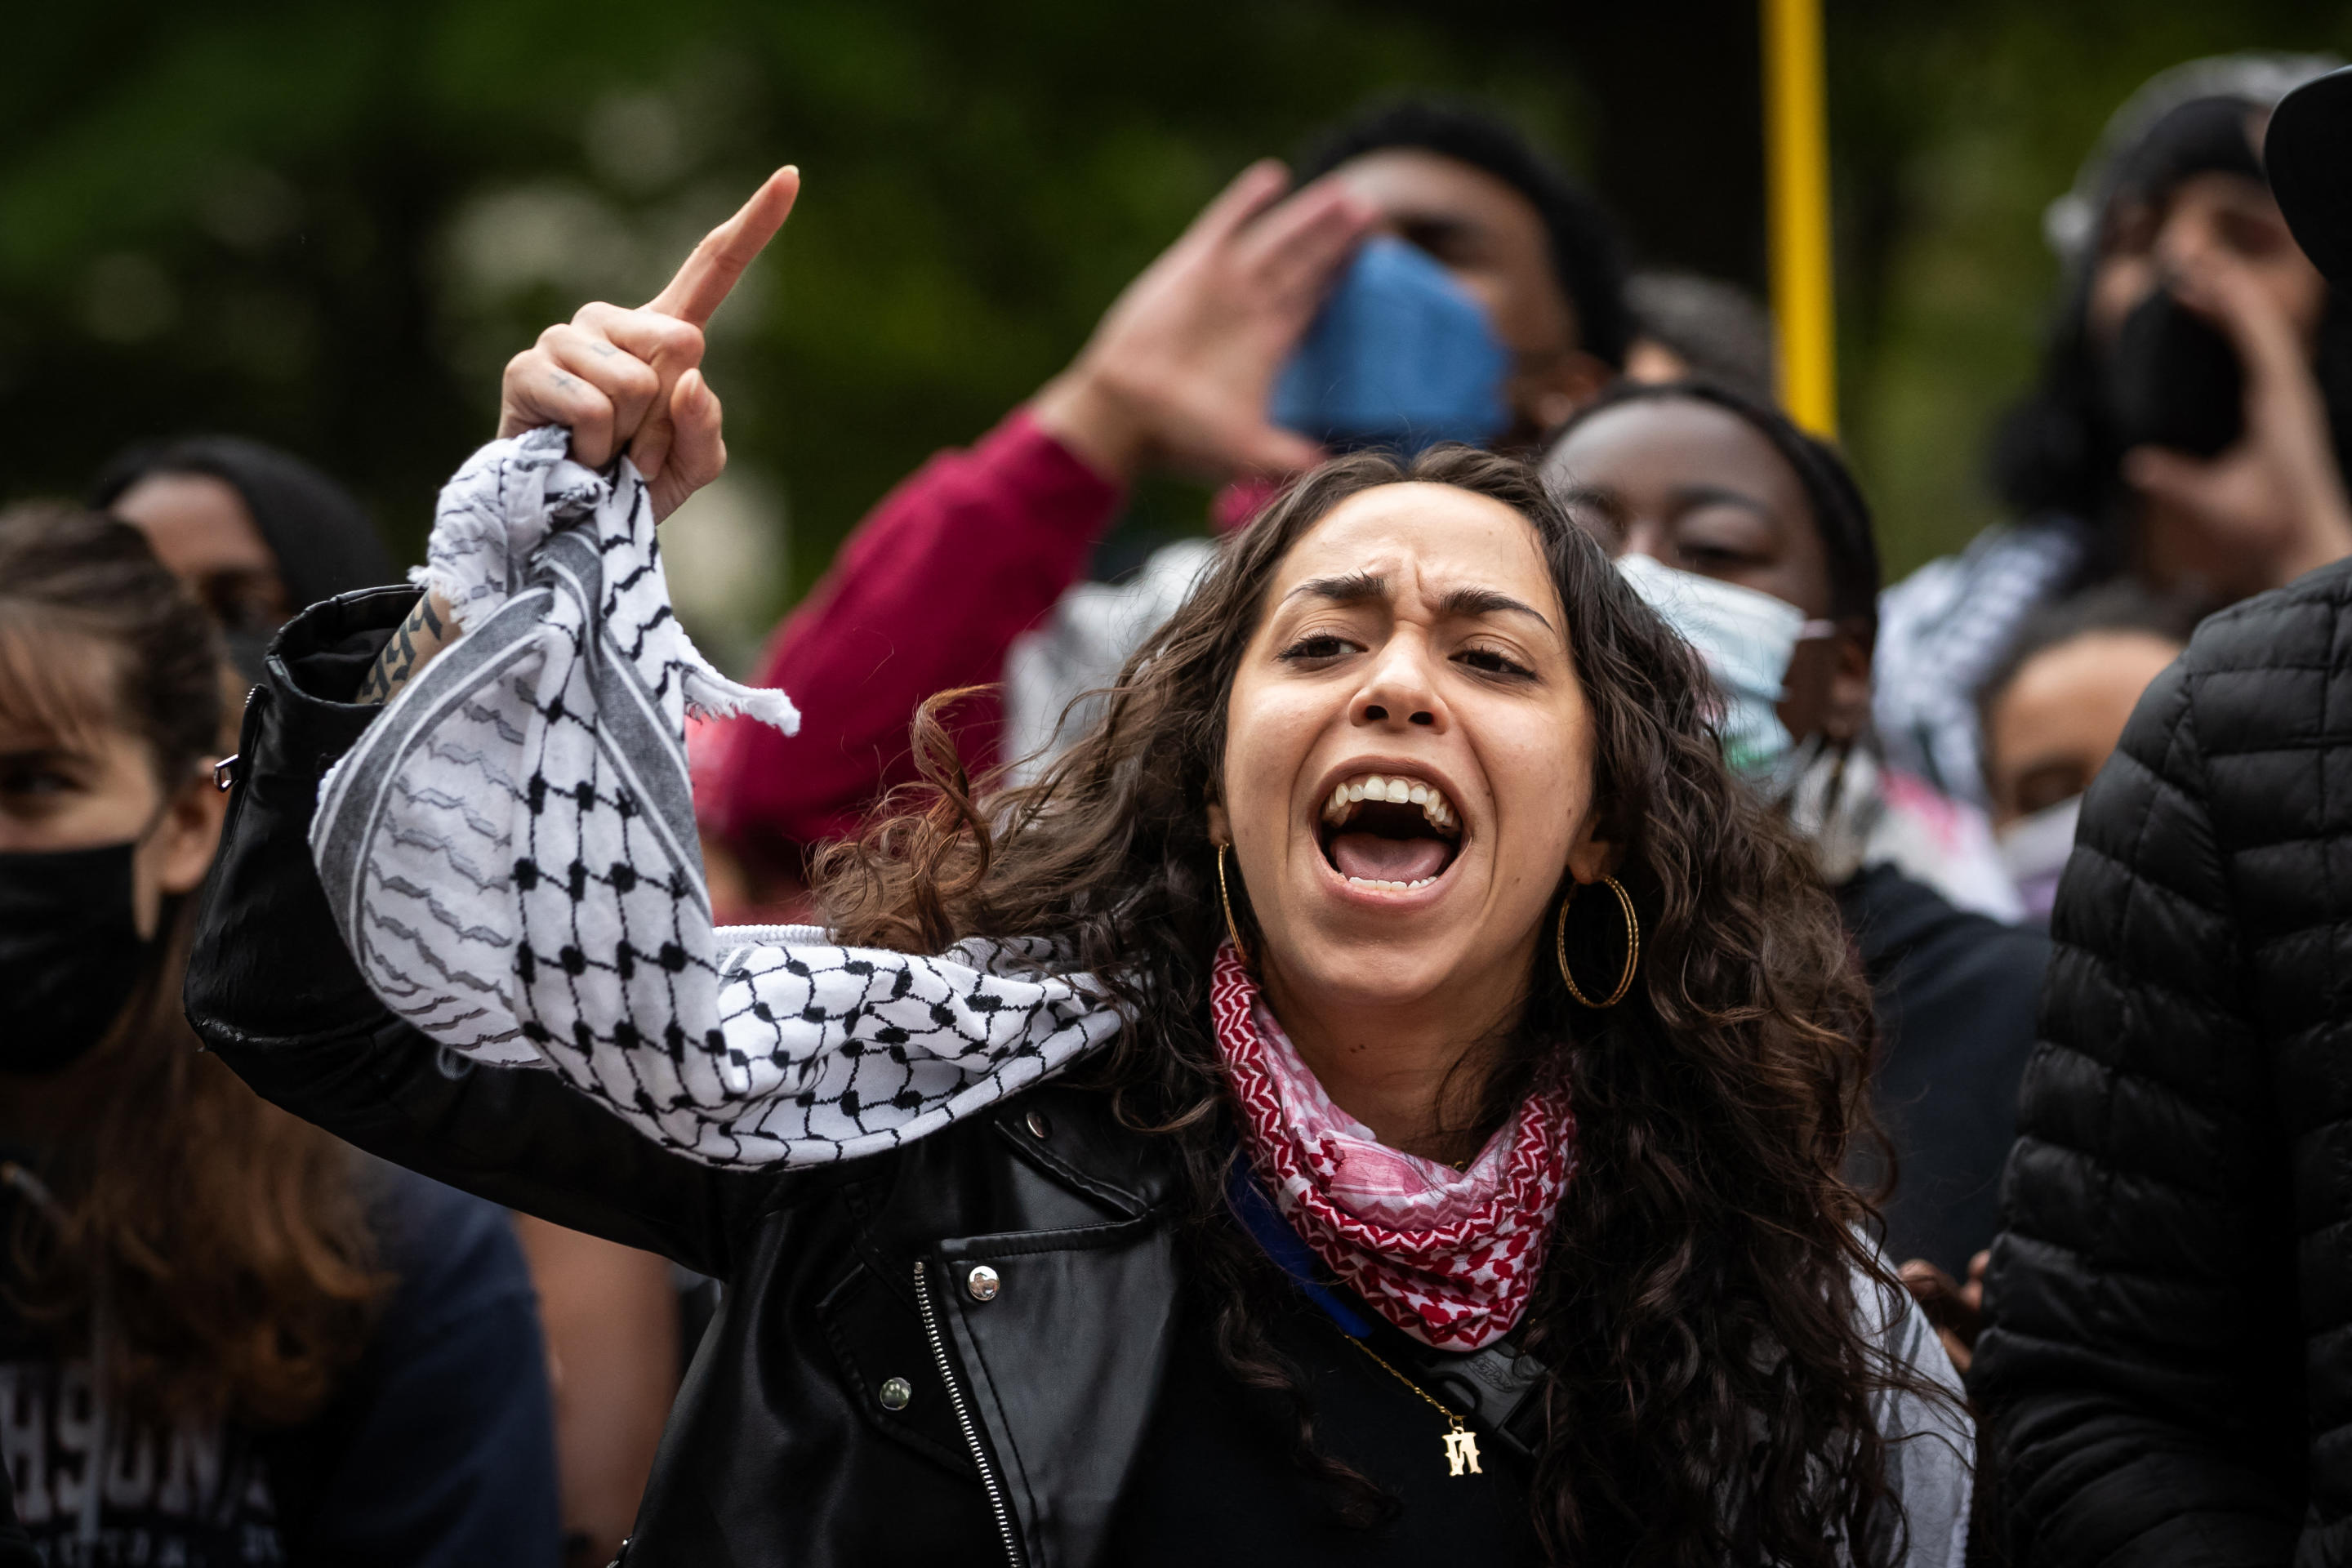 A demonstrator chants during a rally at an encampment at George Washington University.